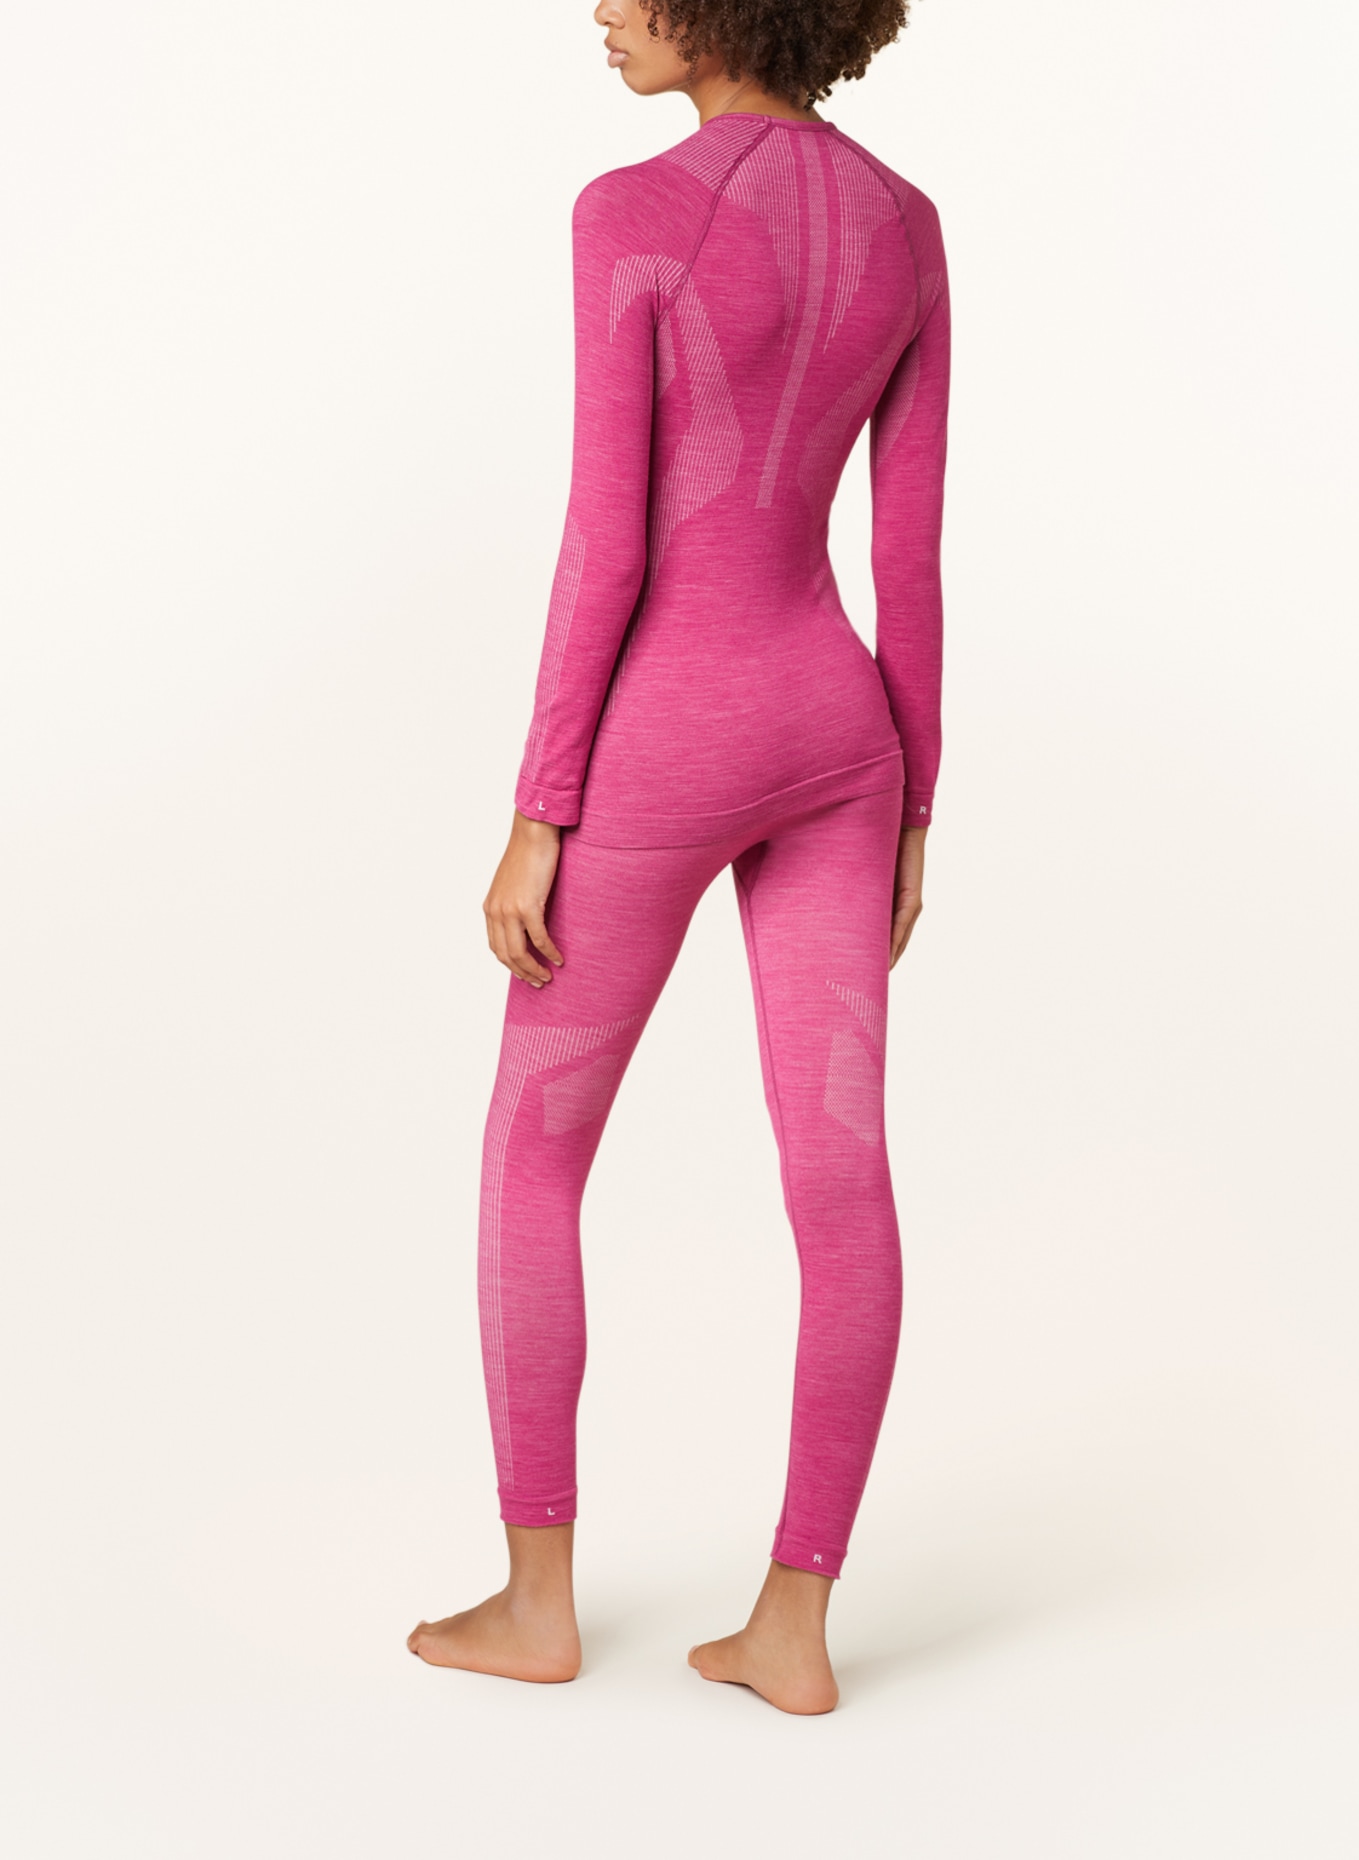 FALKE Functional base layer trousers WOOL-TECH with merino wool, Color: PINK (Image 3)